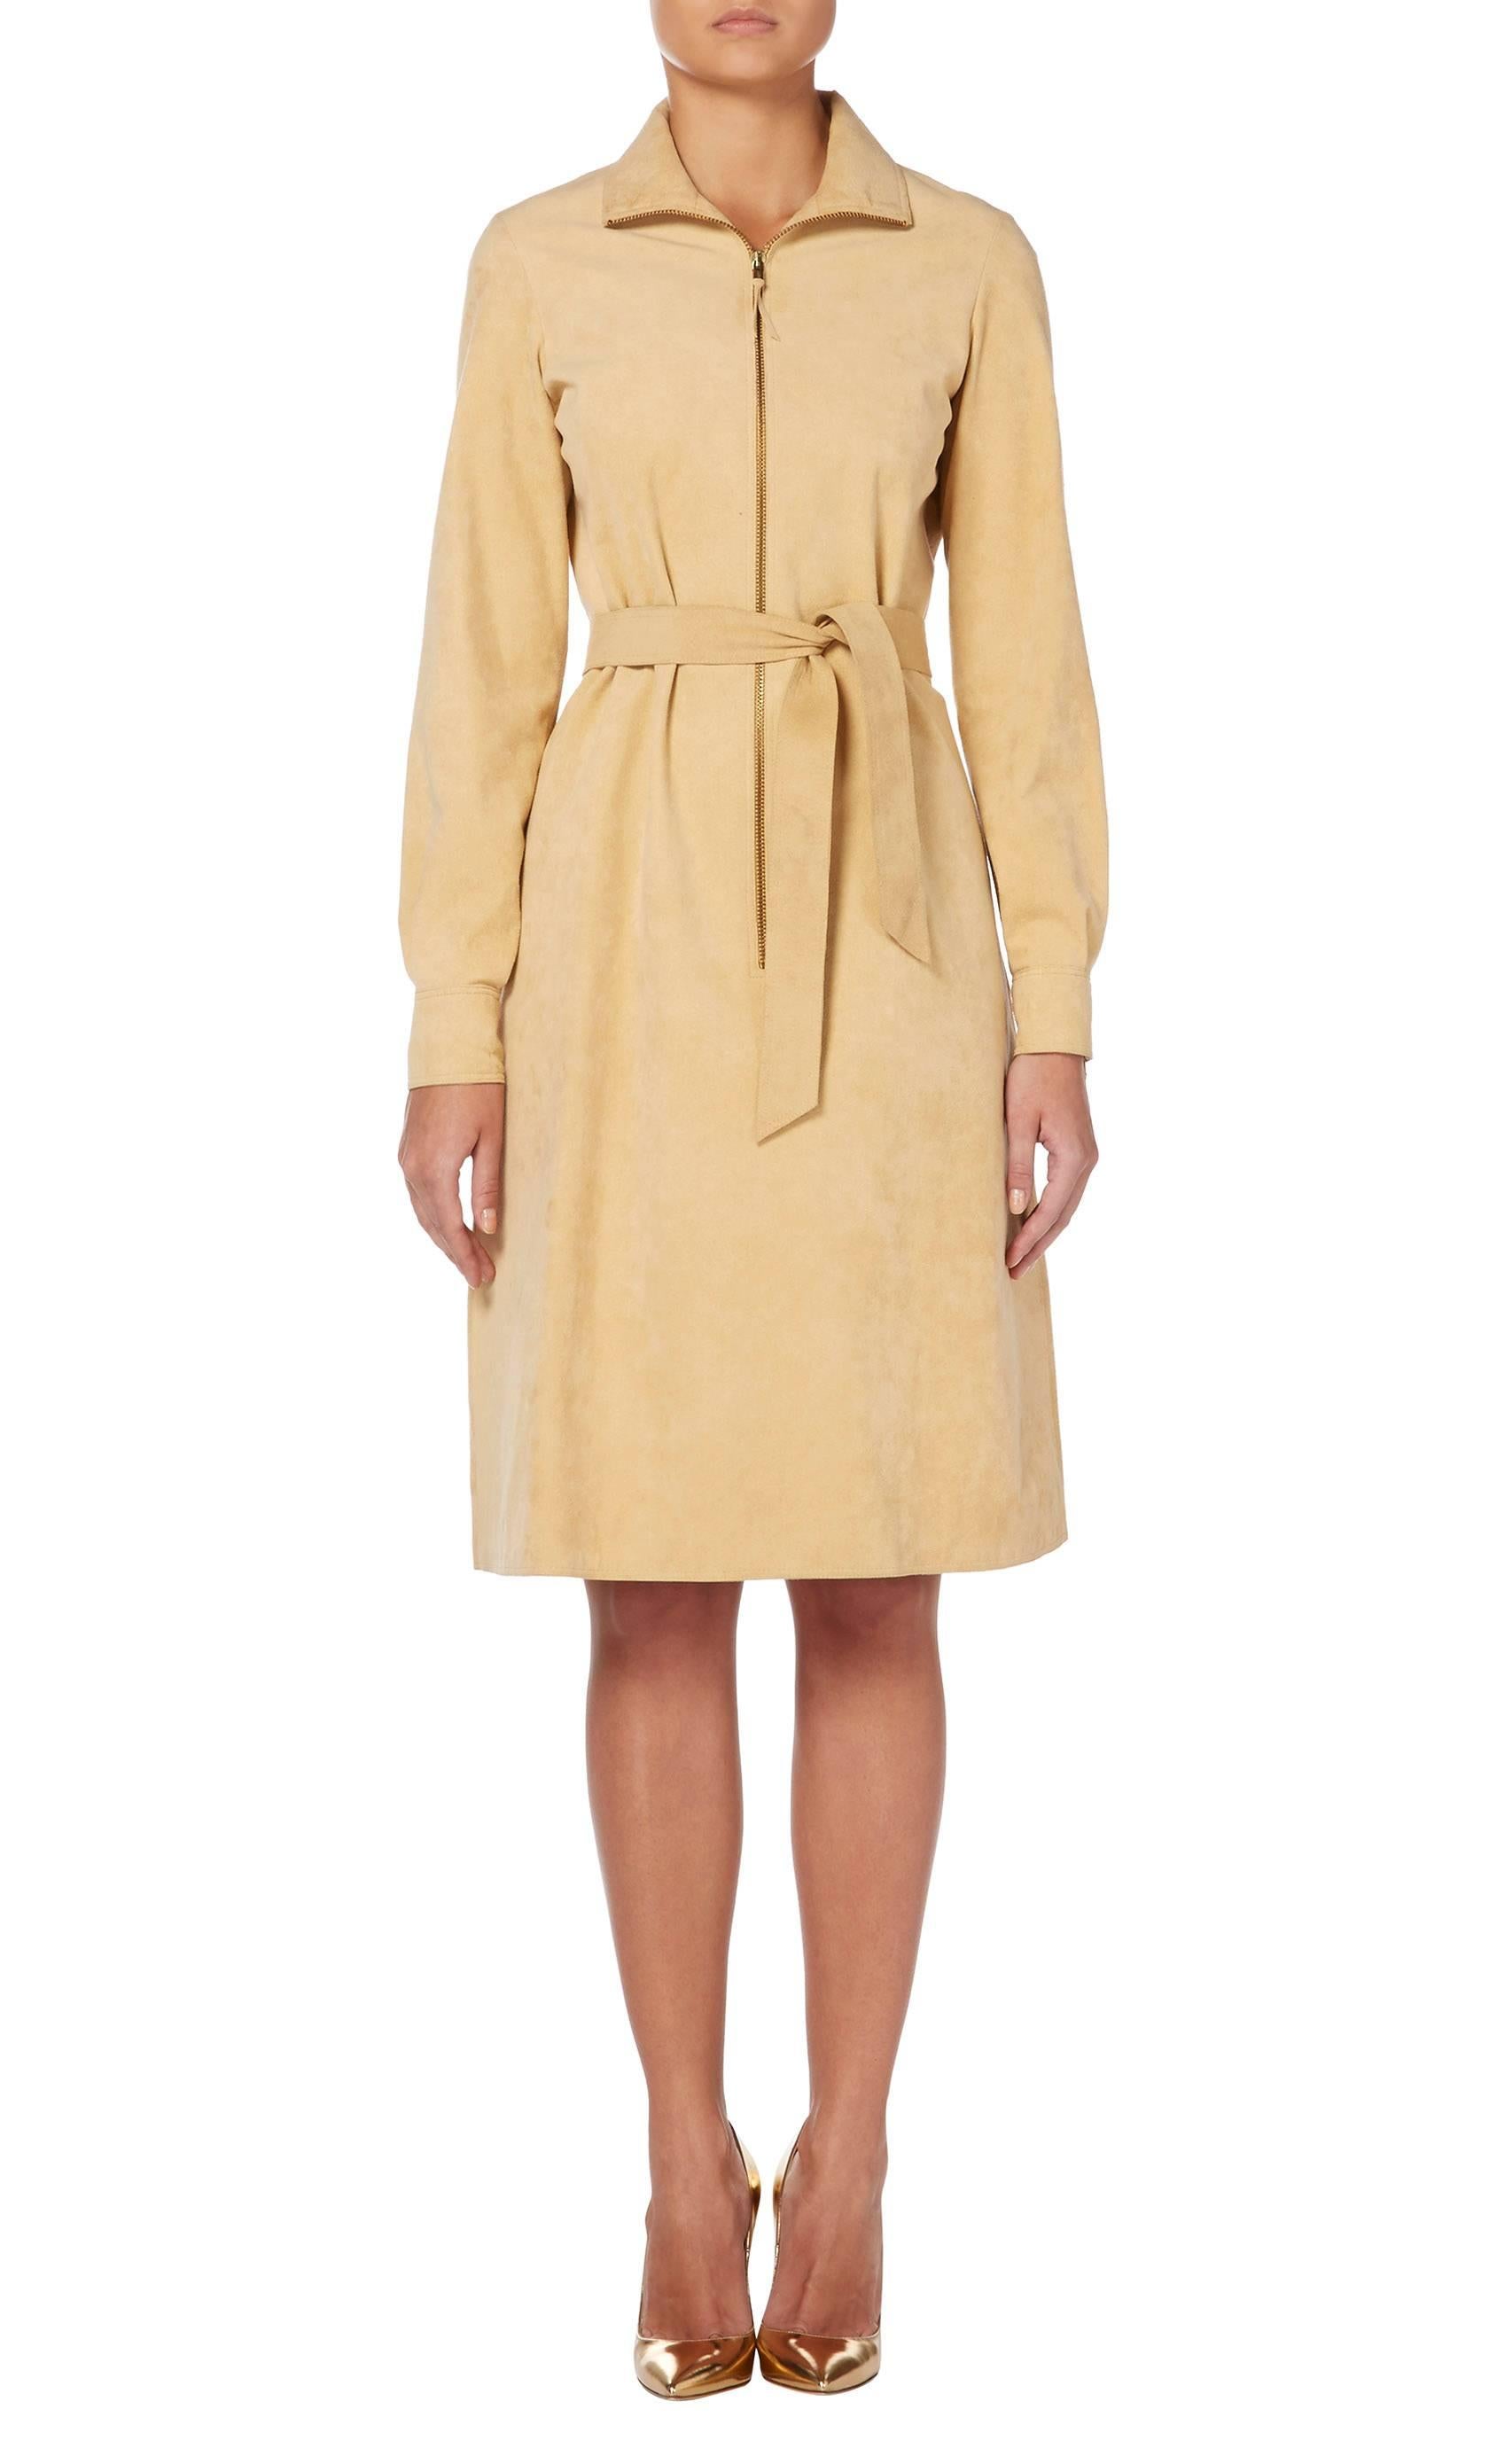 Constructed in Halston's signature Ultrasuede, this shirt dress, in a flattering neutral shade, is a fantastic work wear option. With a zip to the front, slip pockets on the hip and a fabric-matched belt at the waist, this dress is chic yet